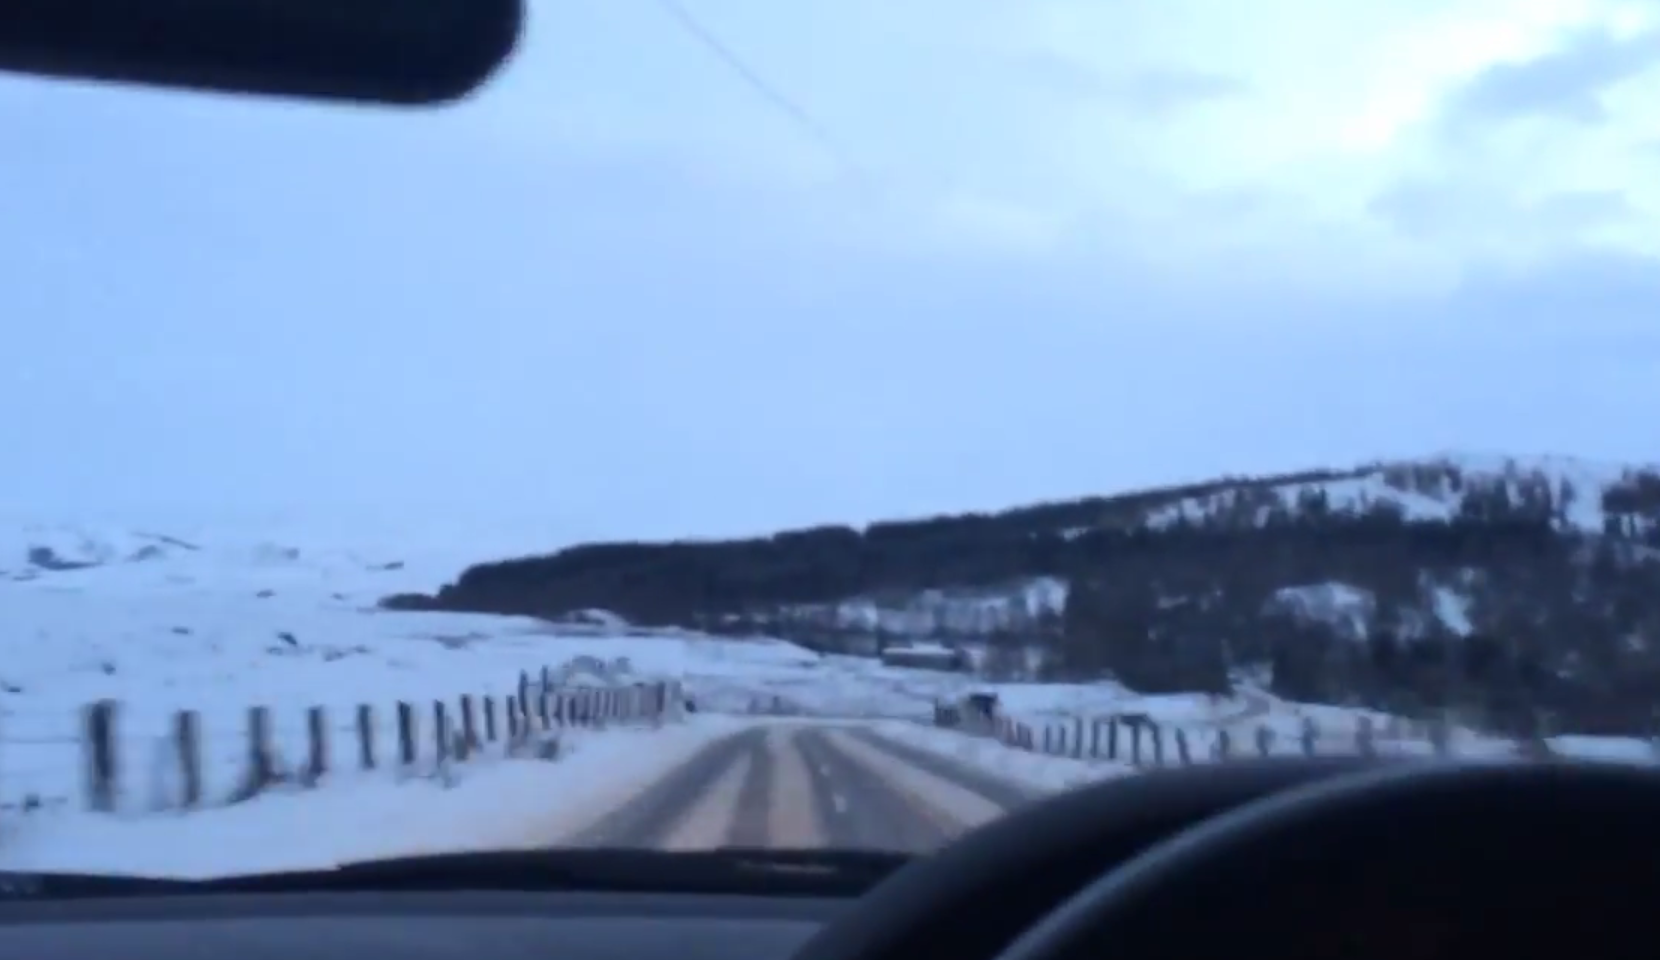 The drive between Loch Ness and Fort William